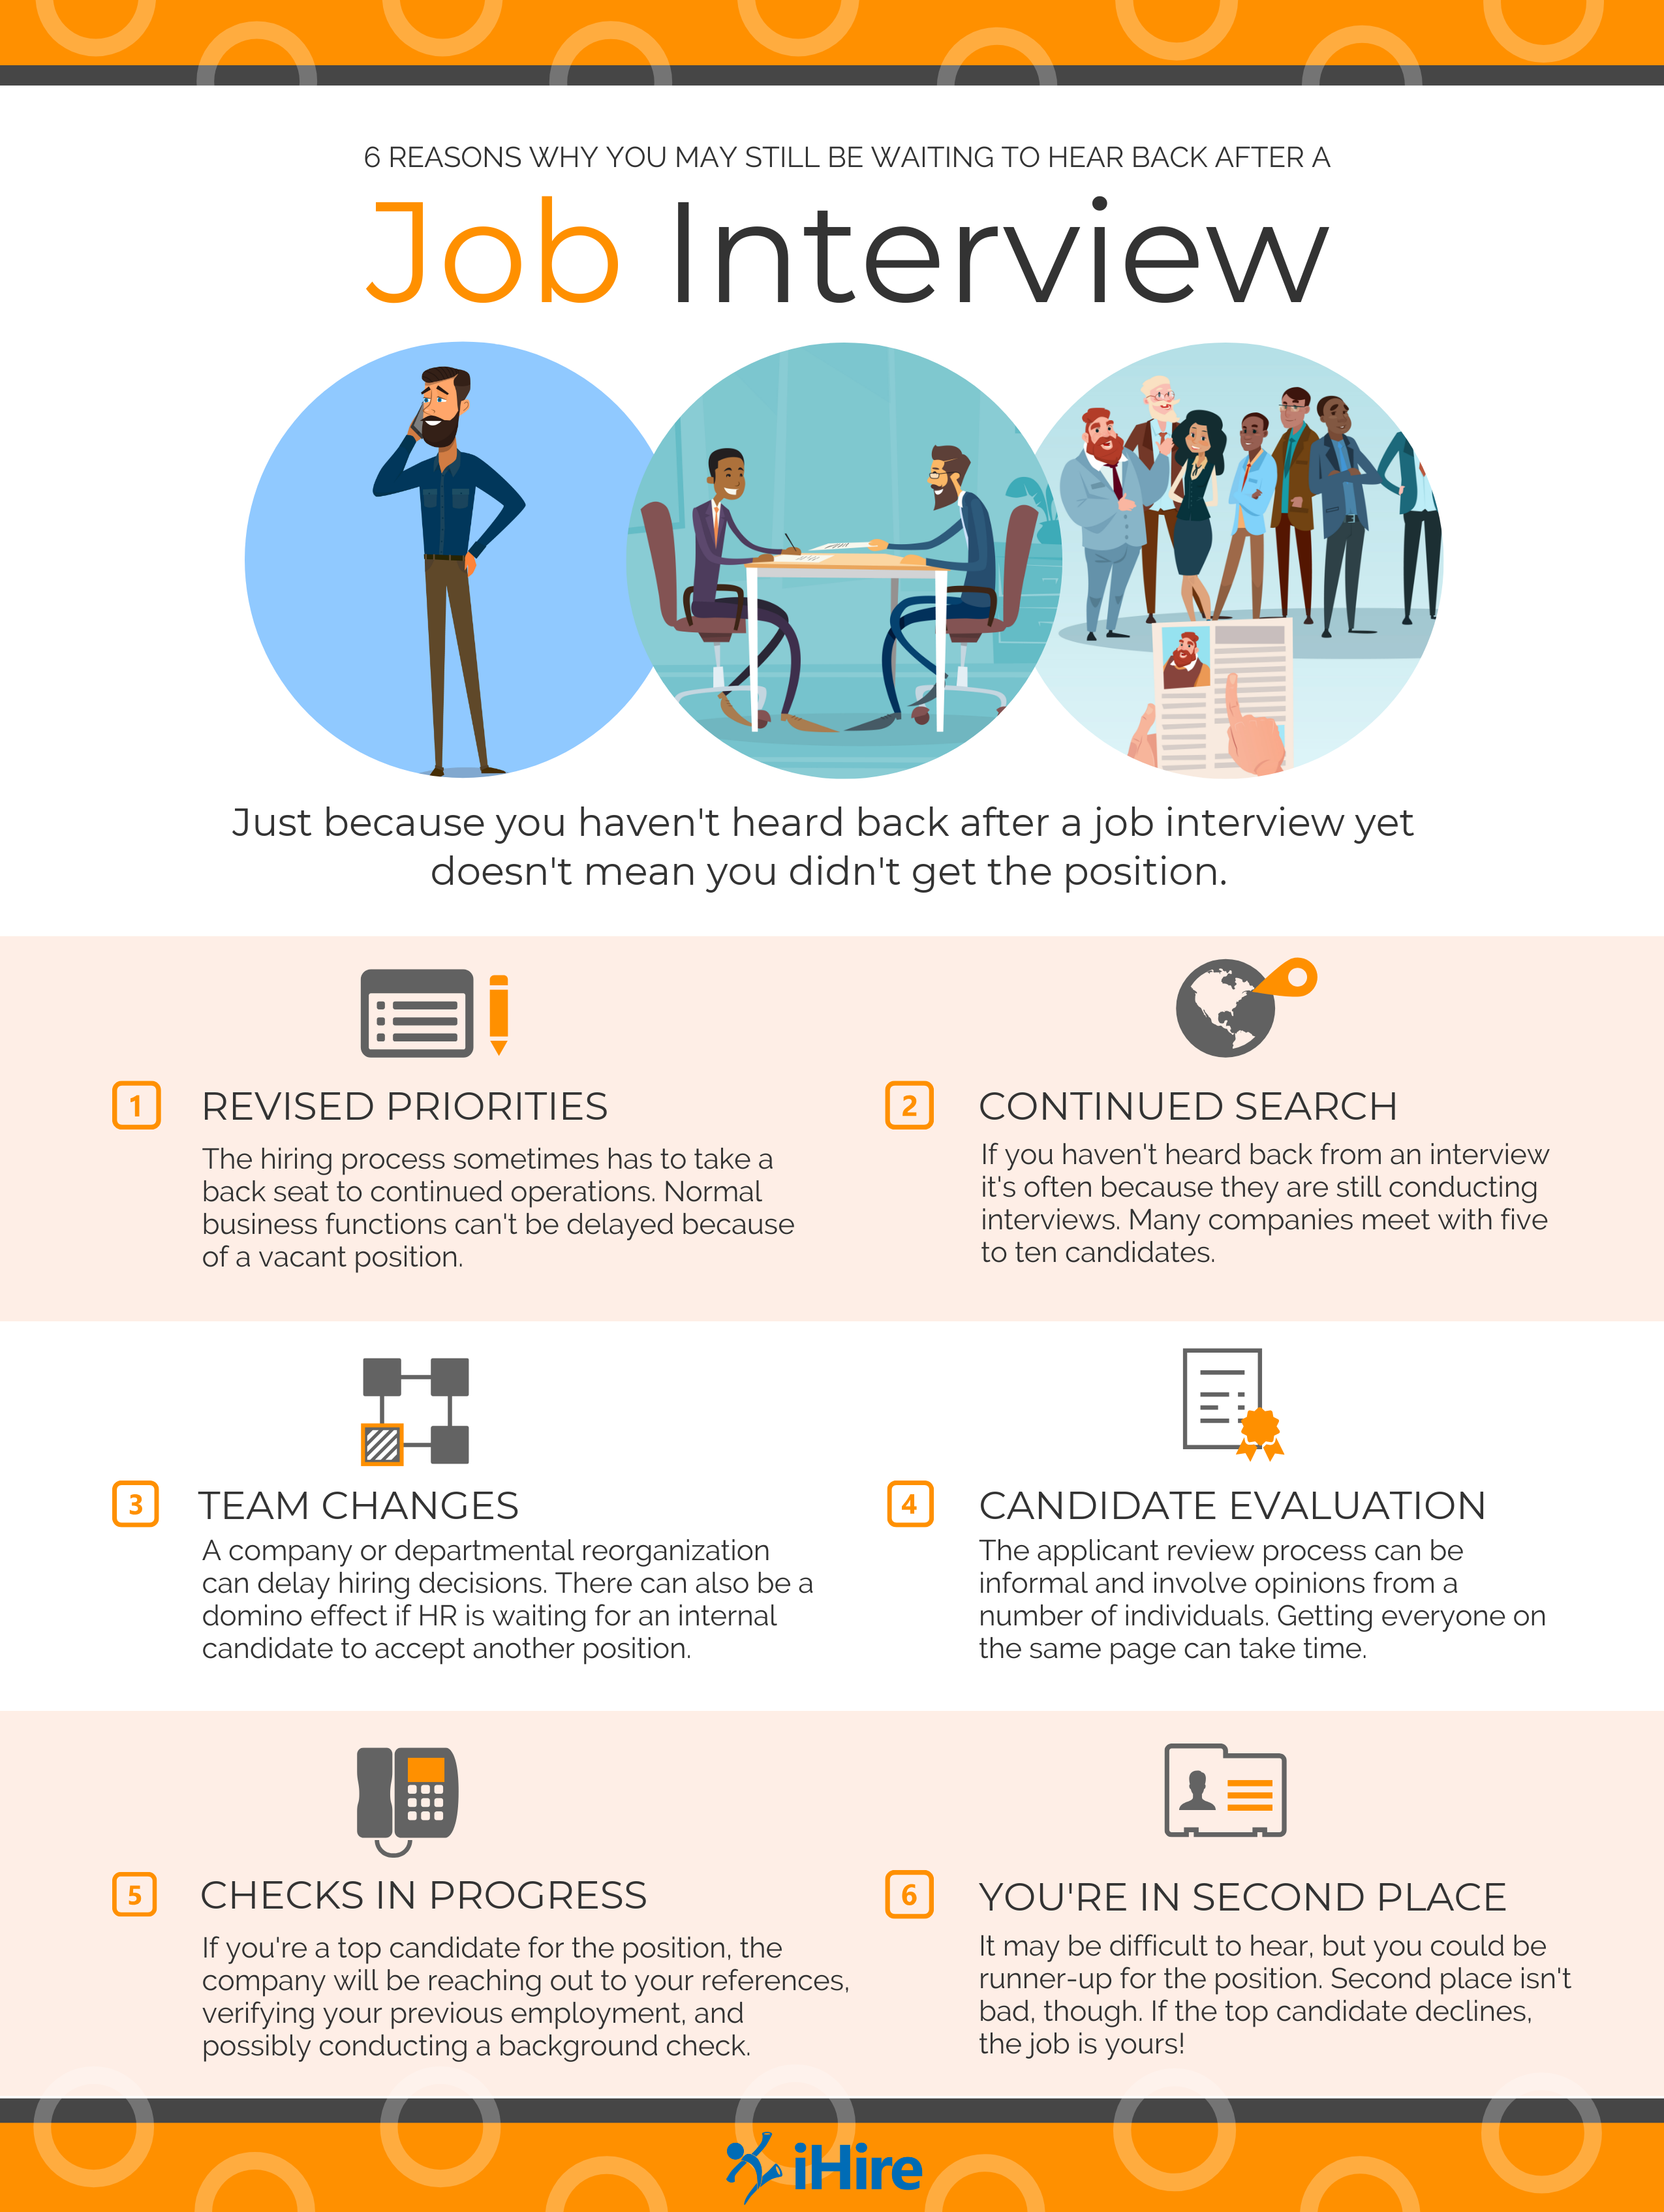 6 Reasons Why You May Still Be Waiting to Hear Back after a Job Interview  - infographic